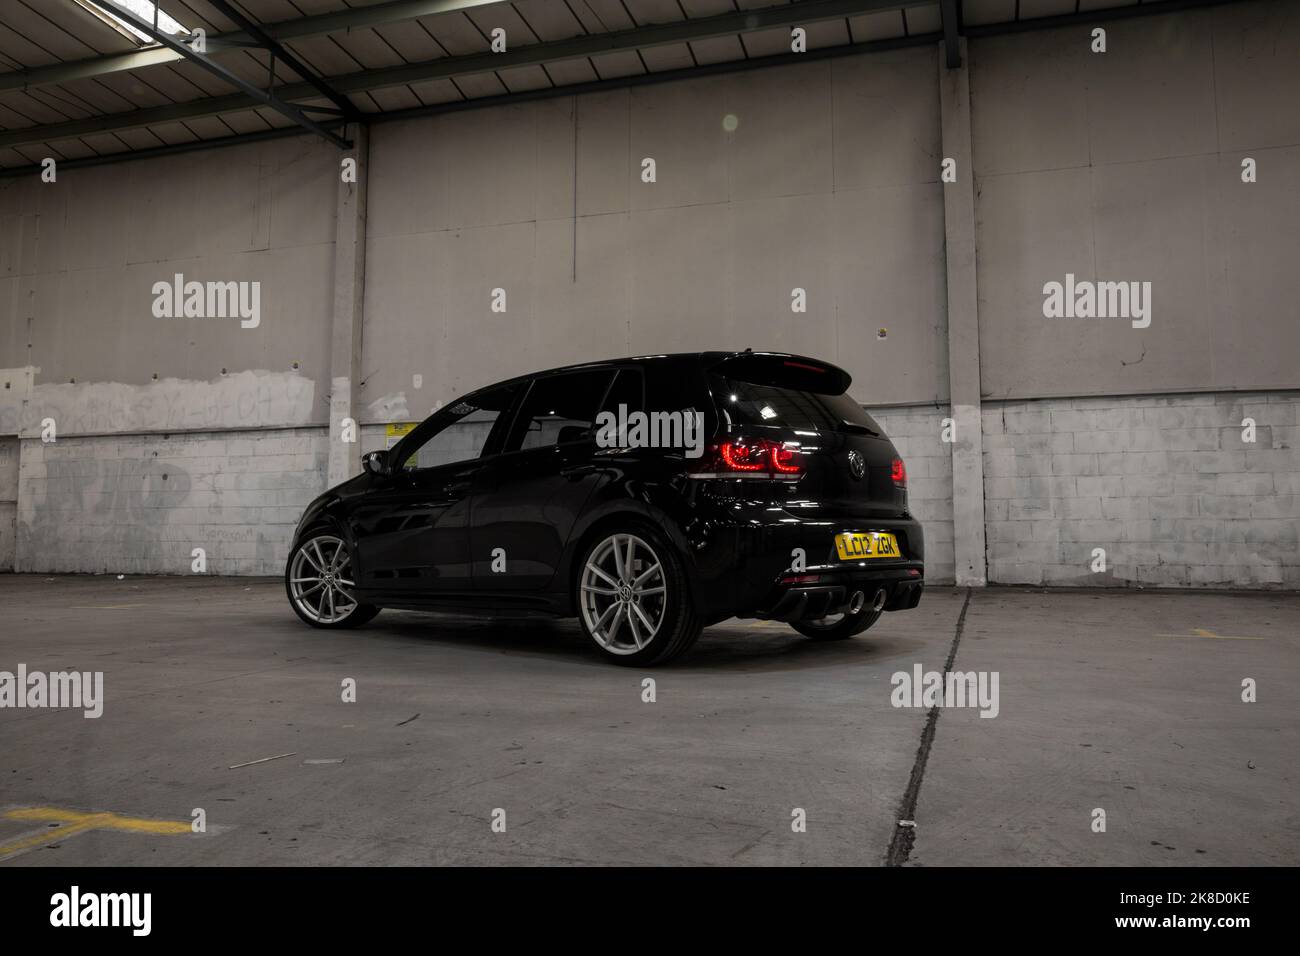 A Modified Indium Deep Black Pearl 2012 Volkswagen Golf R MK6 Hatchback With Silver Alloy Wheels With Carbon Fibre Aftermarket Bodykit Stock Photo